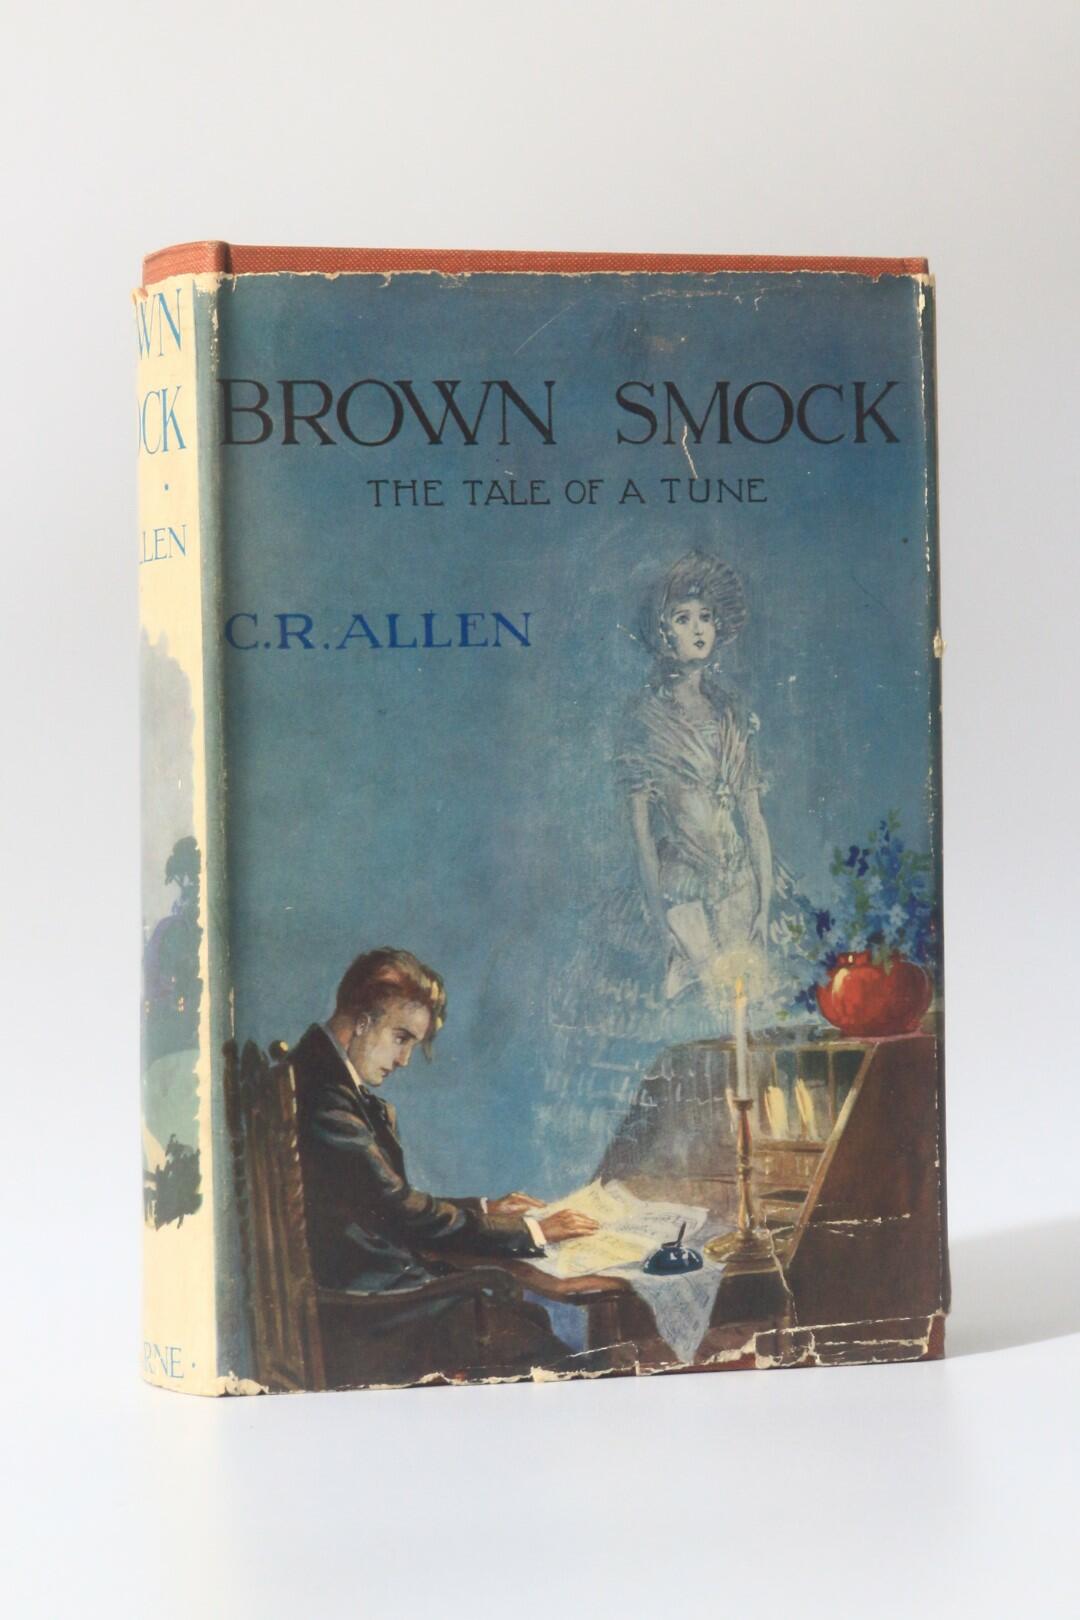 C.R. Allen - Brown Smock: The Tale of a Tune - Frederick Warne, 1926, First Edition.